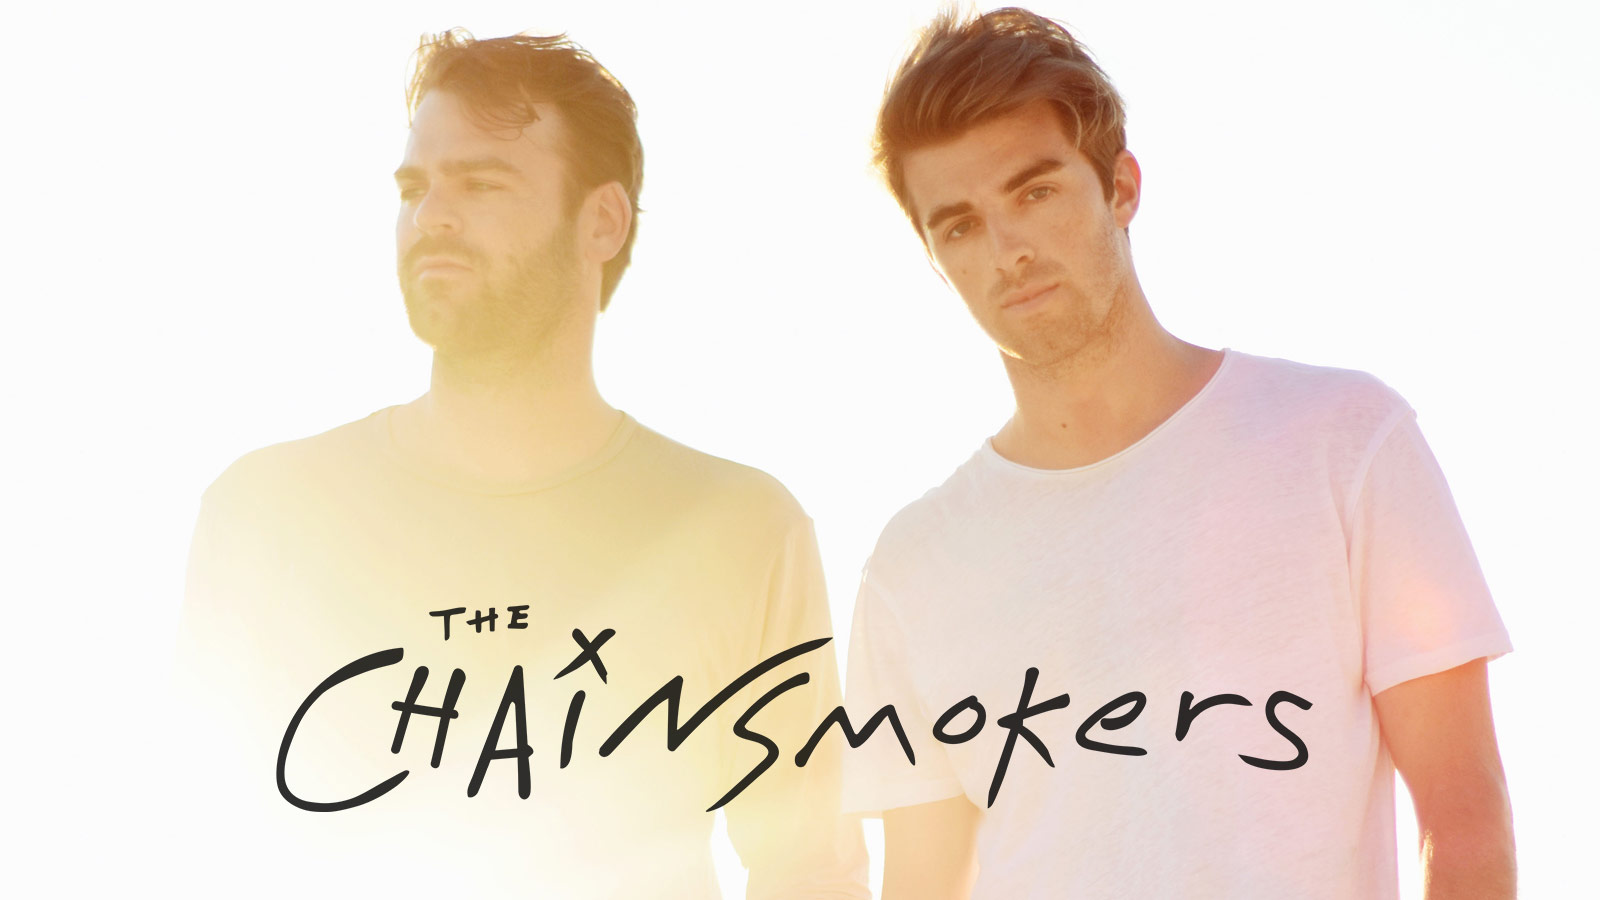 The Chainsmokers host two shows on SiriusXM